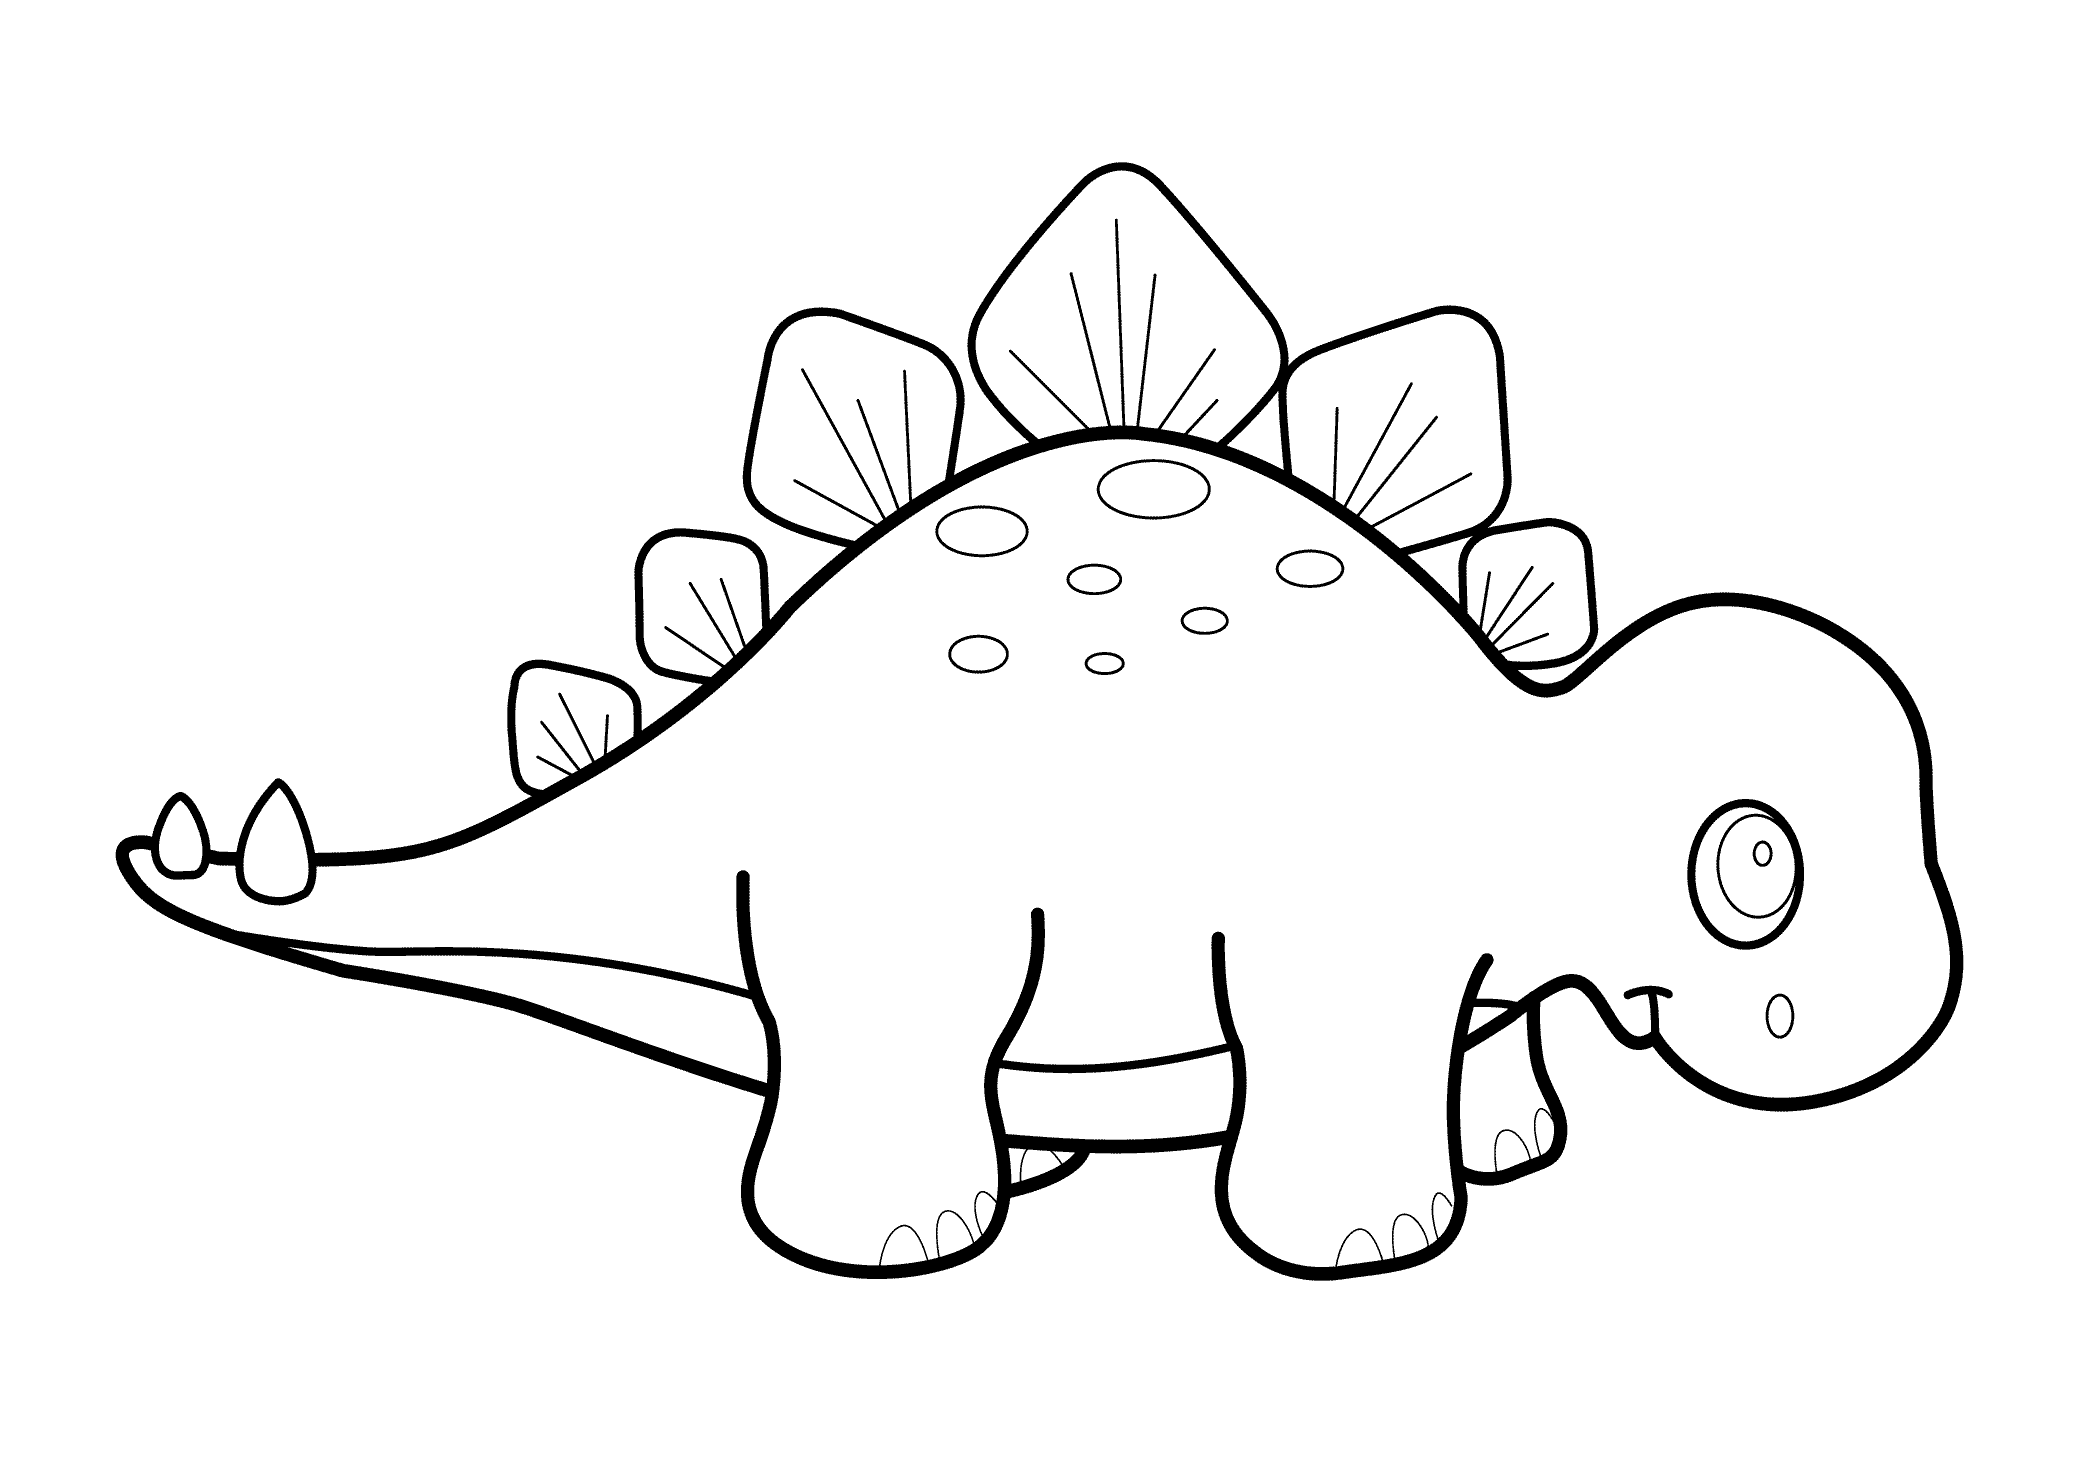 Download Cute Dinosaurs Coloring Page - Coloring Pages - Coloring Home